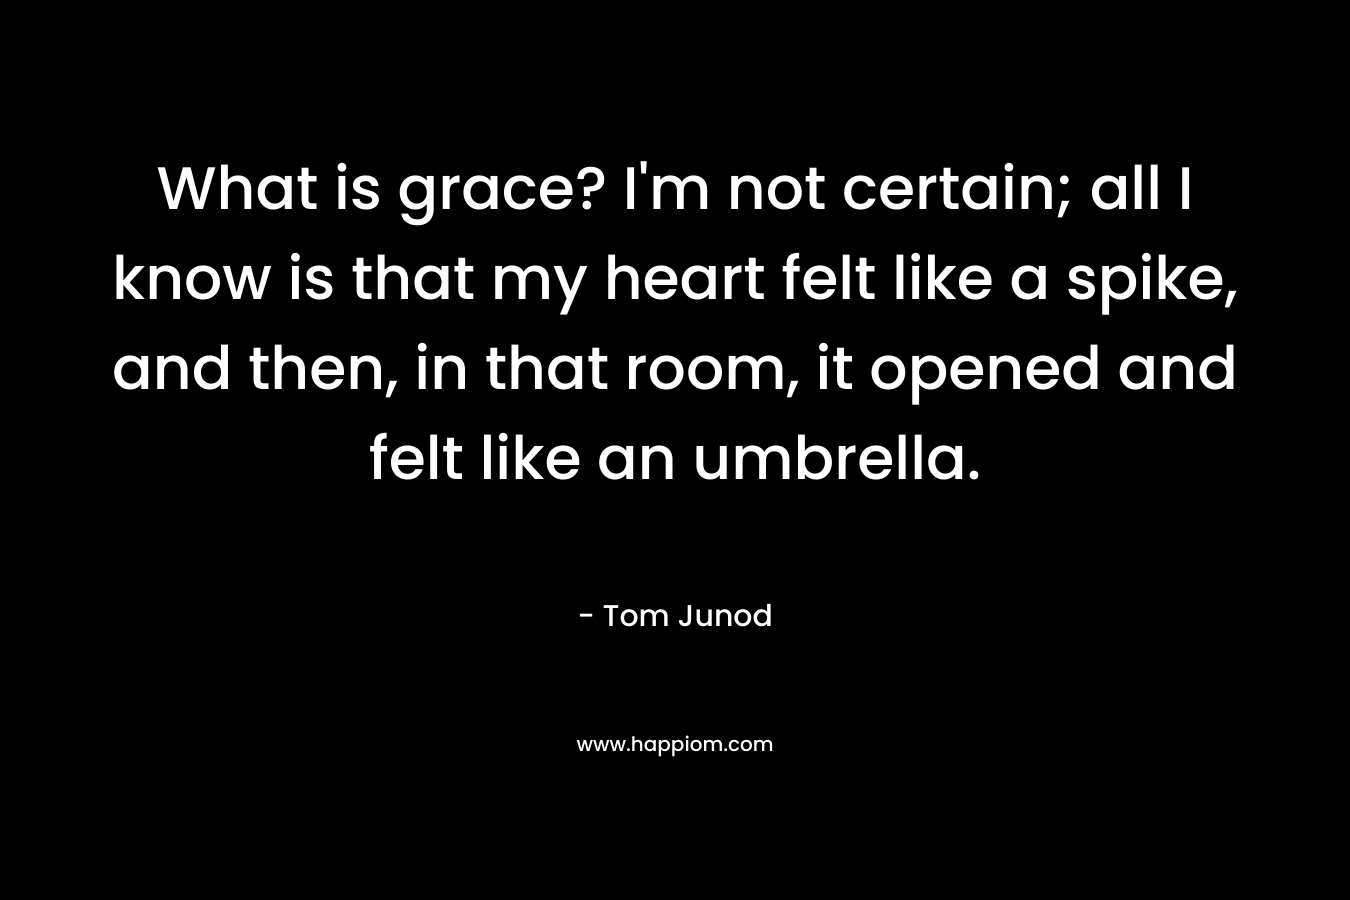 What is grace? I'm not certain; all I know is that my heart felt like a spike, and then, in that room, it opened and felt like an umbrella.